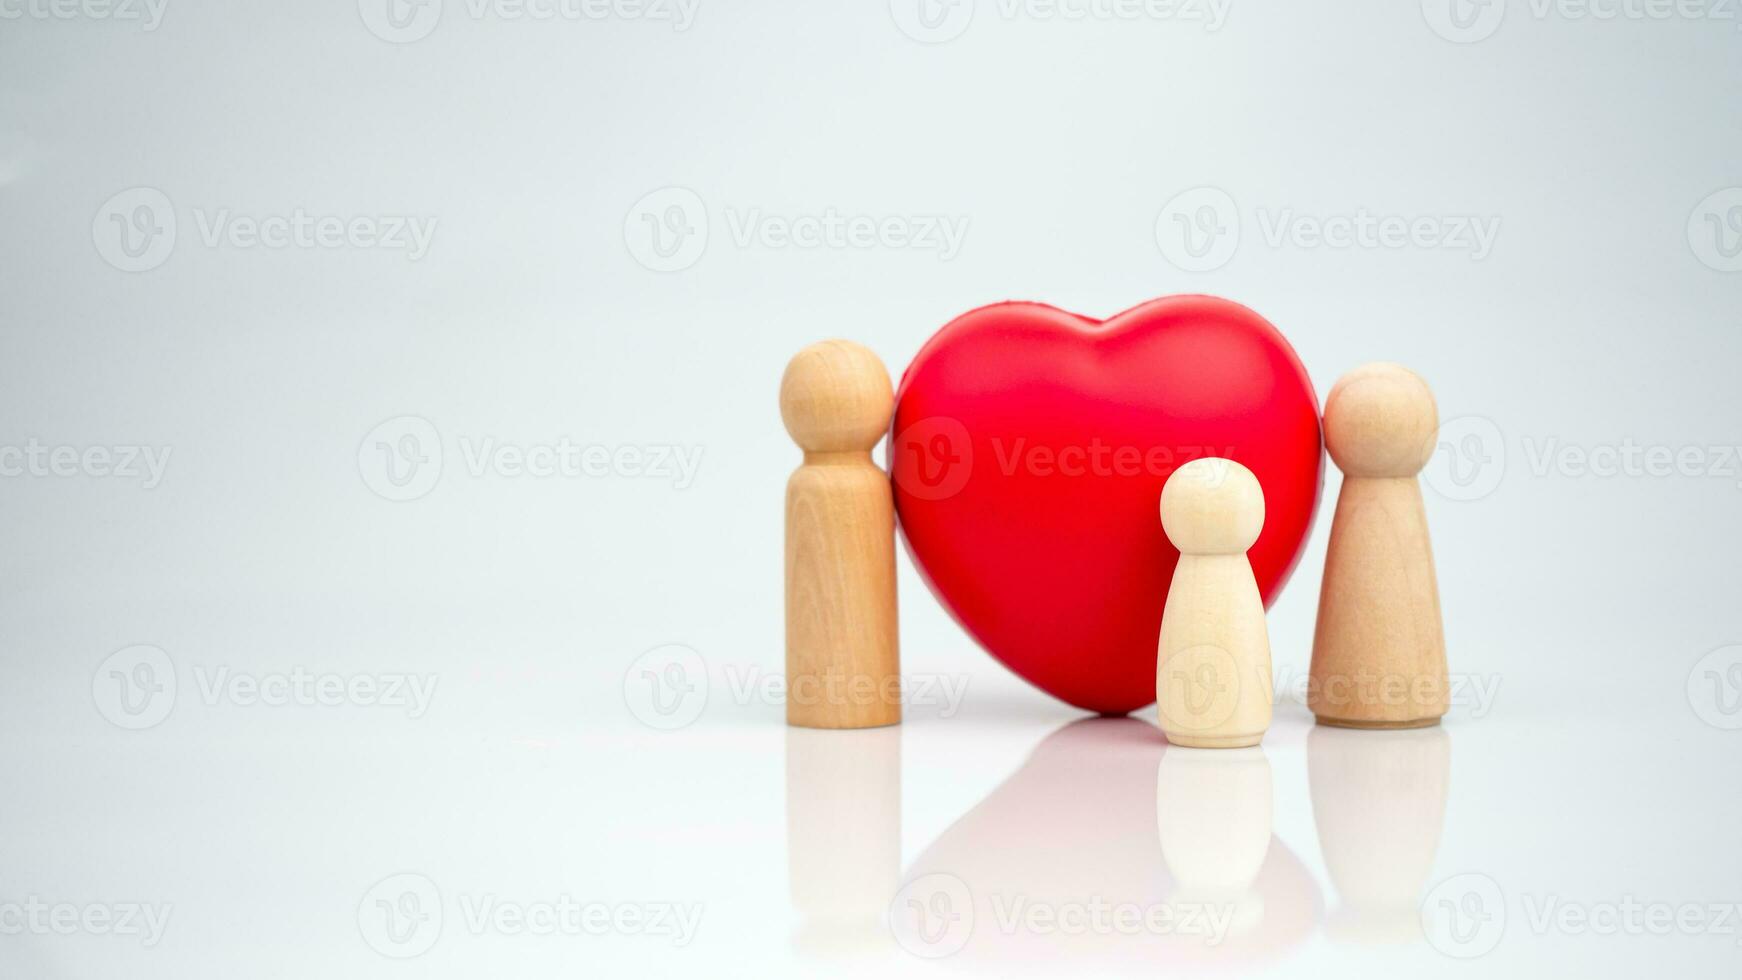 The concept of health insurance and Medical welfare. A wooden doll with a red heart on a white background represents protection, receiving benefits. Health insurance and access to treatment. photo